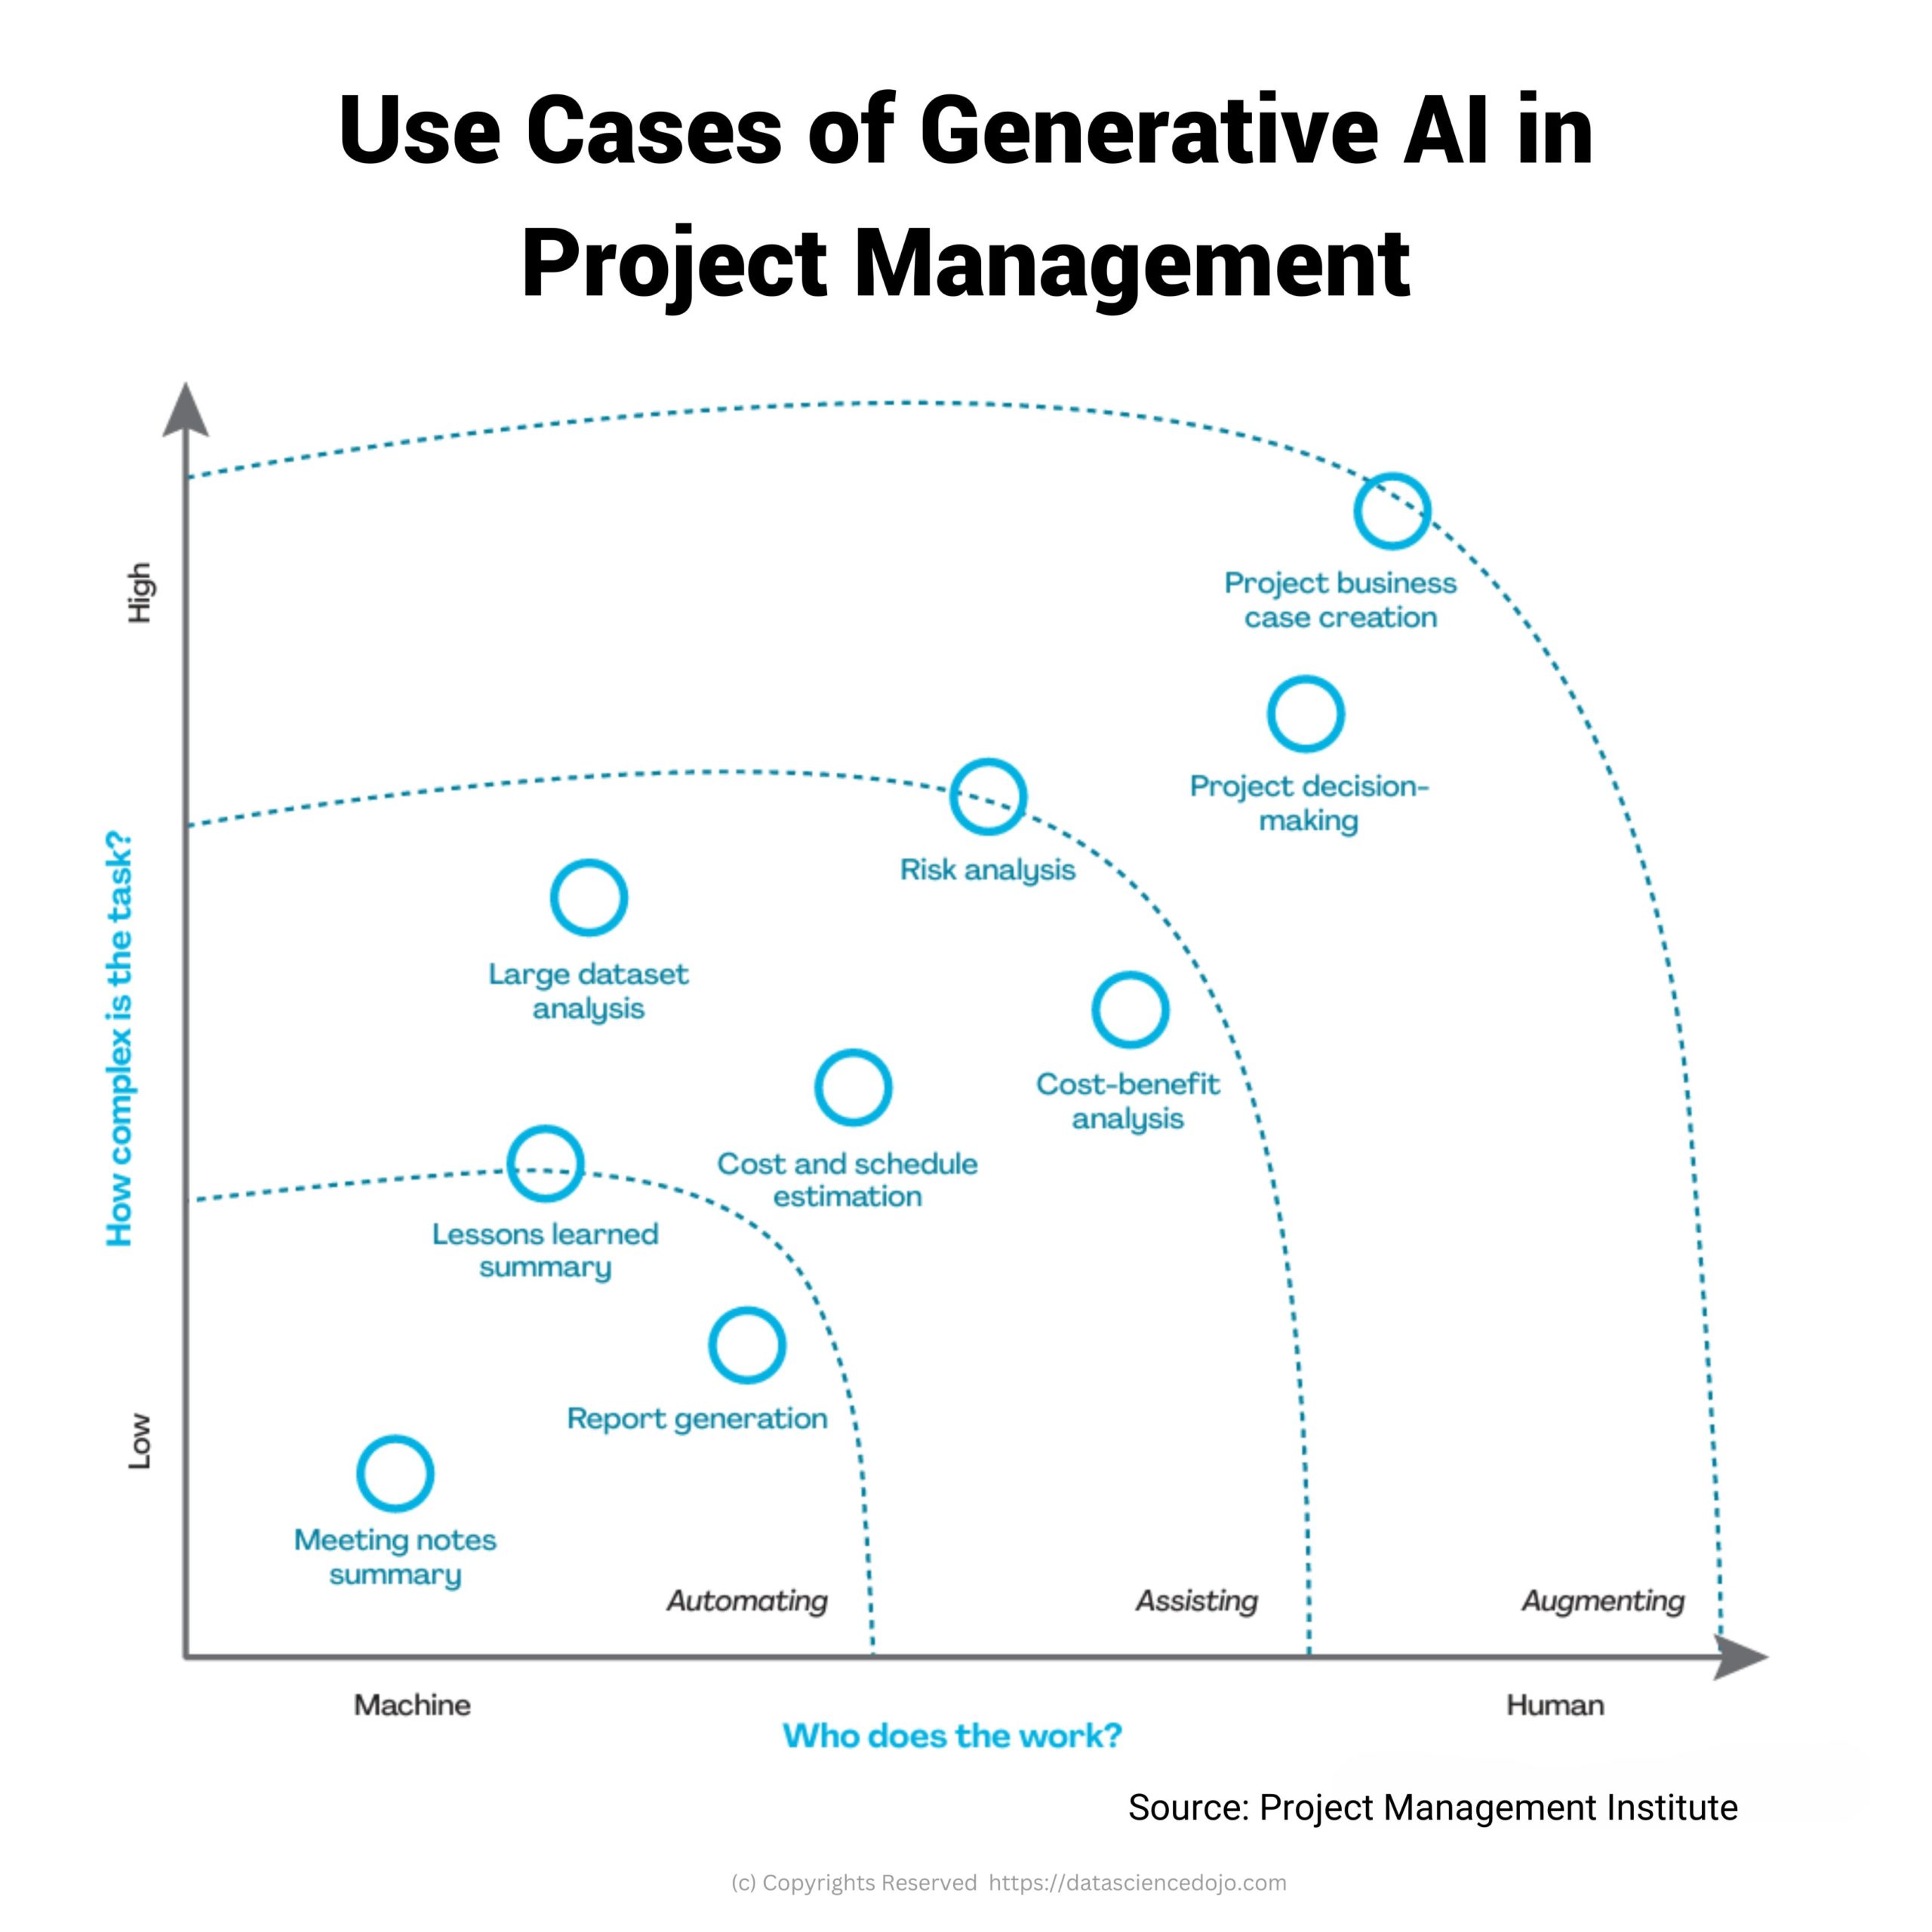 Use Cases of Generative AI in ai Project Management